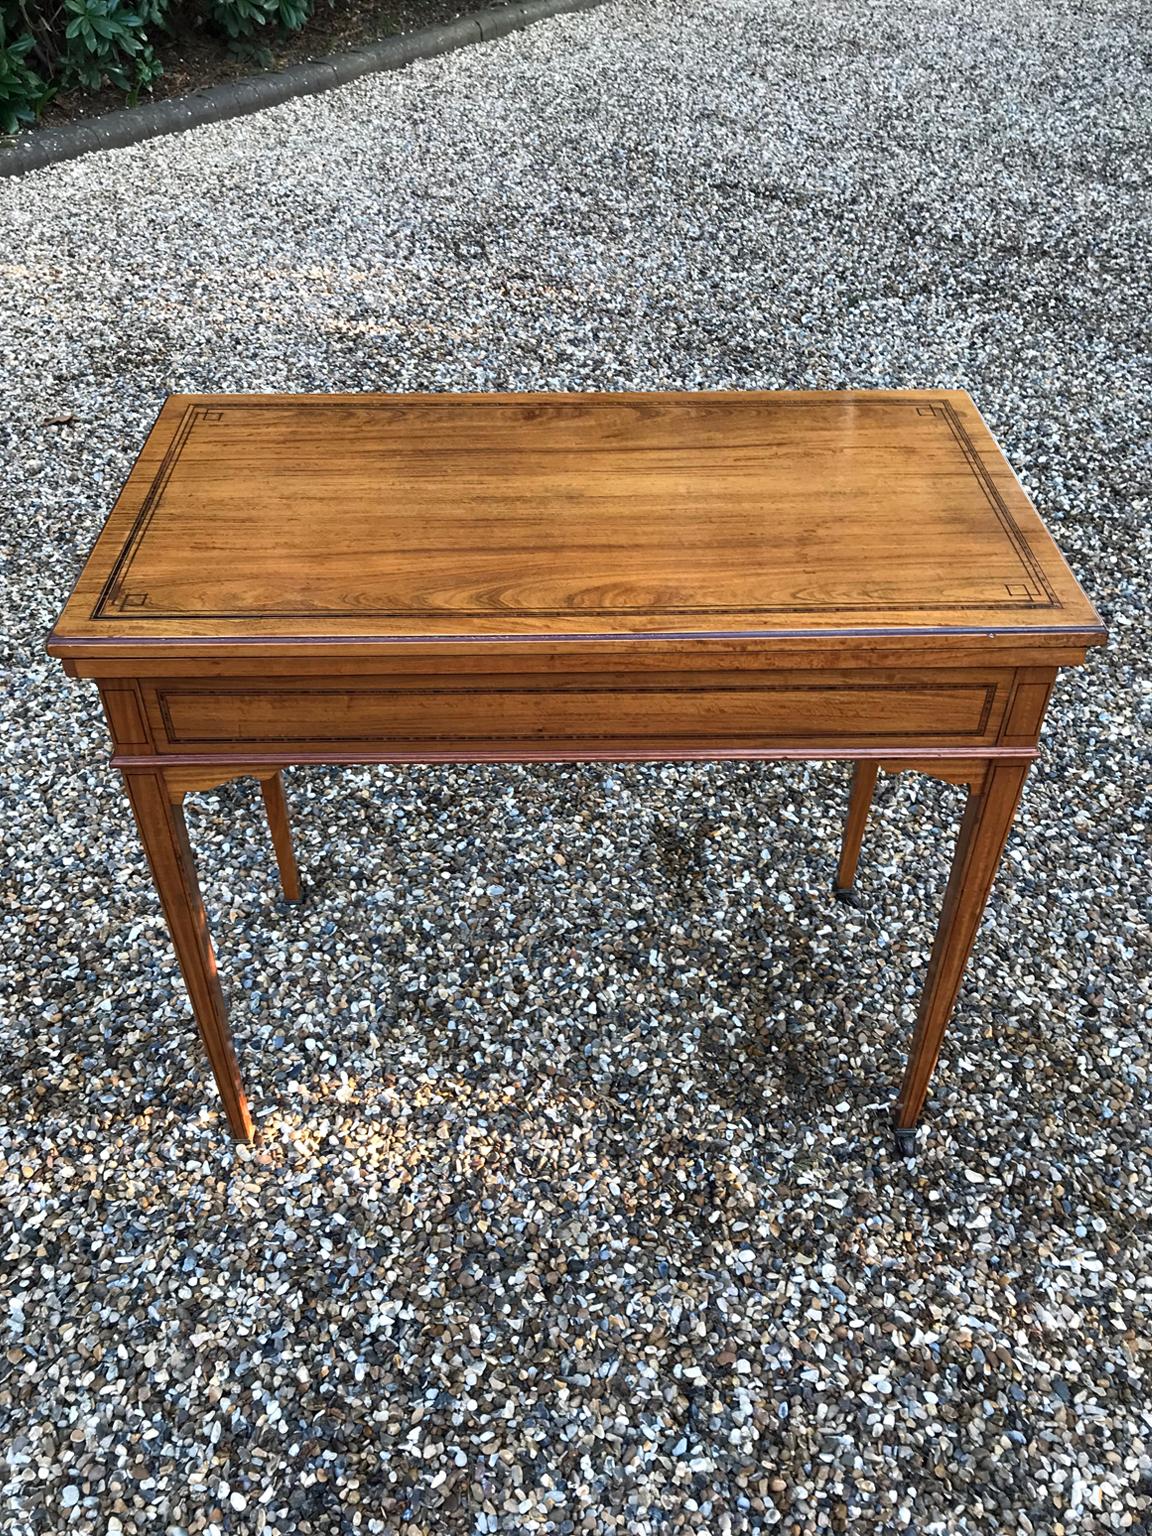 19th century Satinwood card table, with rosewood crossbanded and ebony strung folding. There are useful compartments on the inside when swivelled before opening up the card table. On square tapering legs and original brass castors.

circa